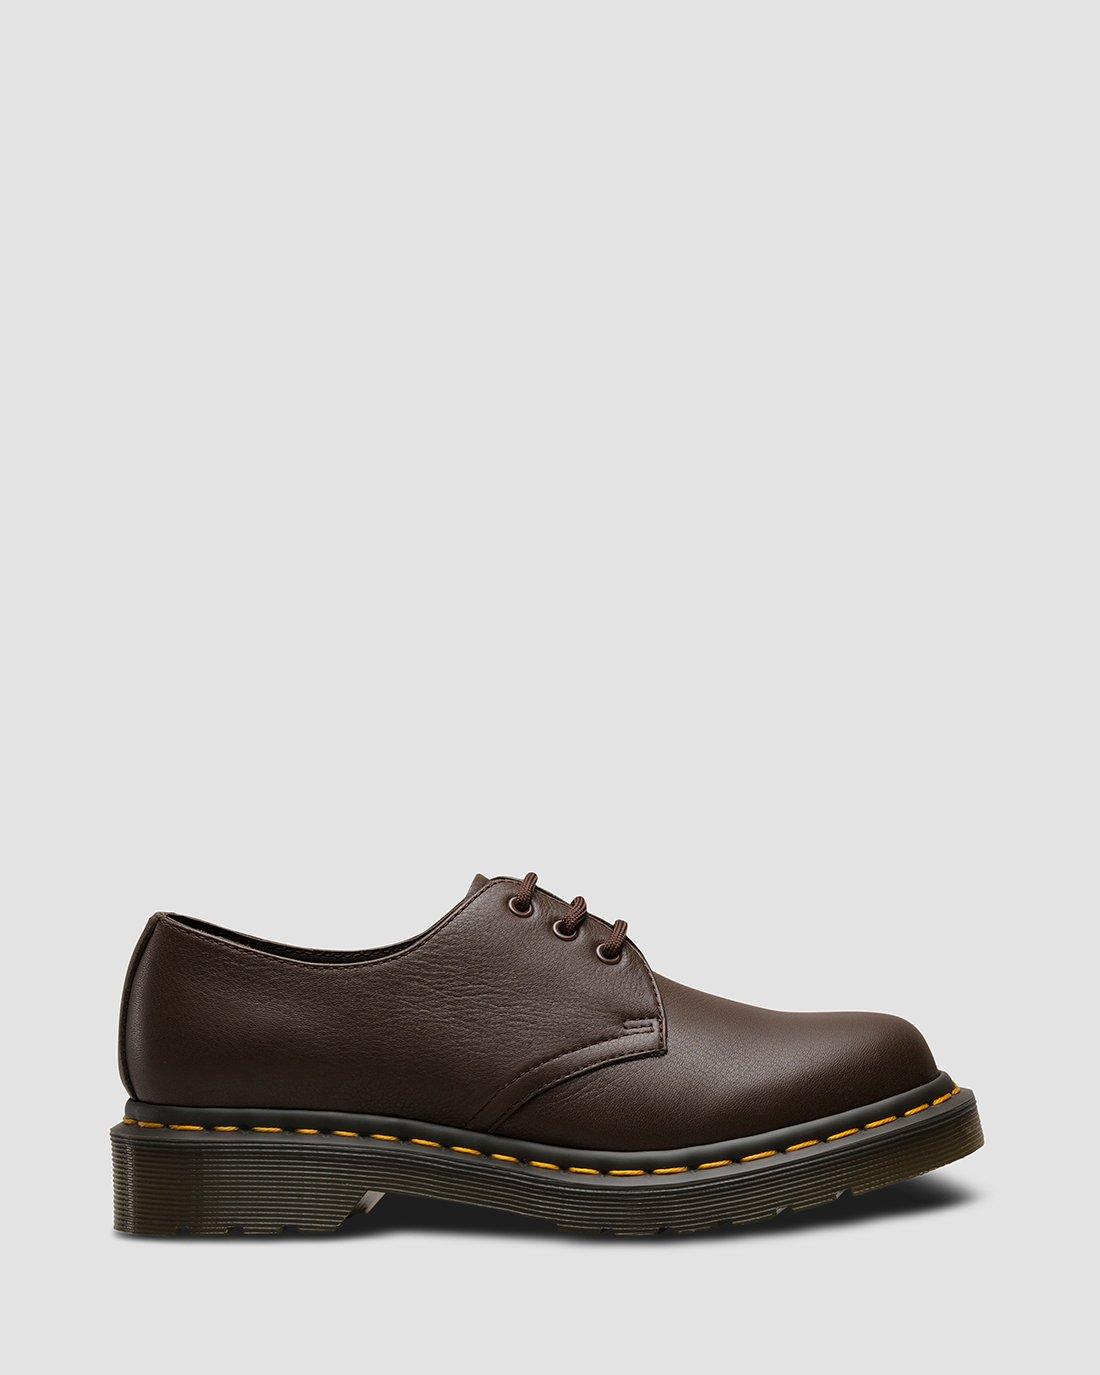 1461 Women's Virginia Leather Oxford Shoes | Dr. Martens